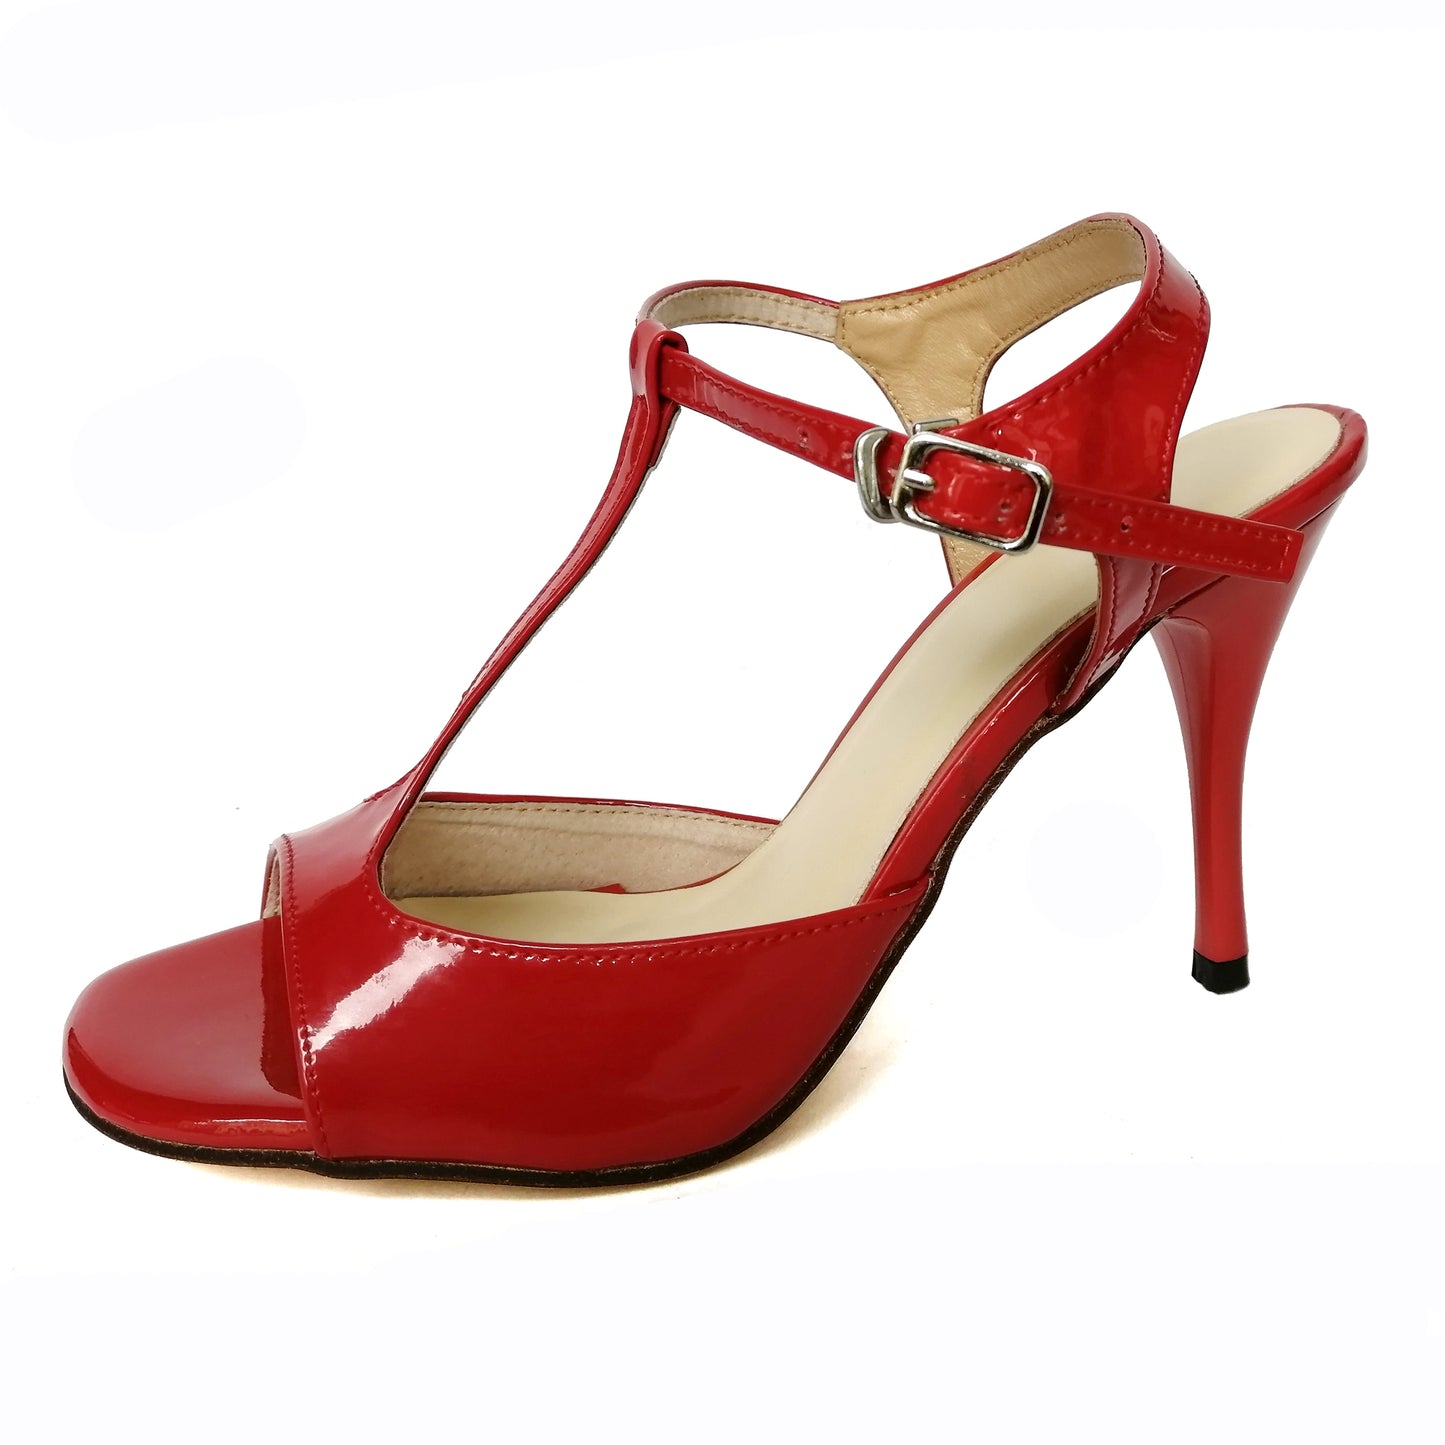 Pro Dancer Women's Argentine Tango Shoes High Heel Dance Sandals Leather Sole Red (PD-9012C)